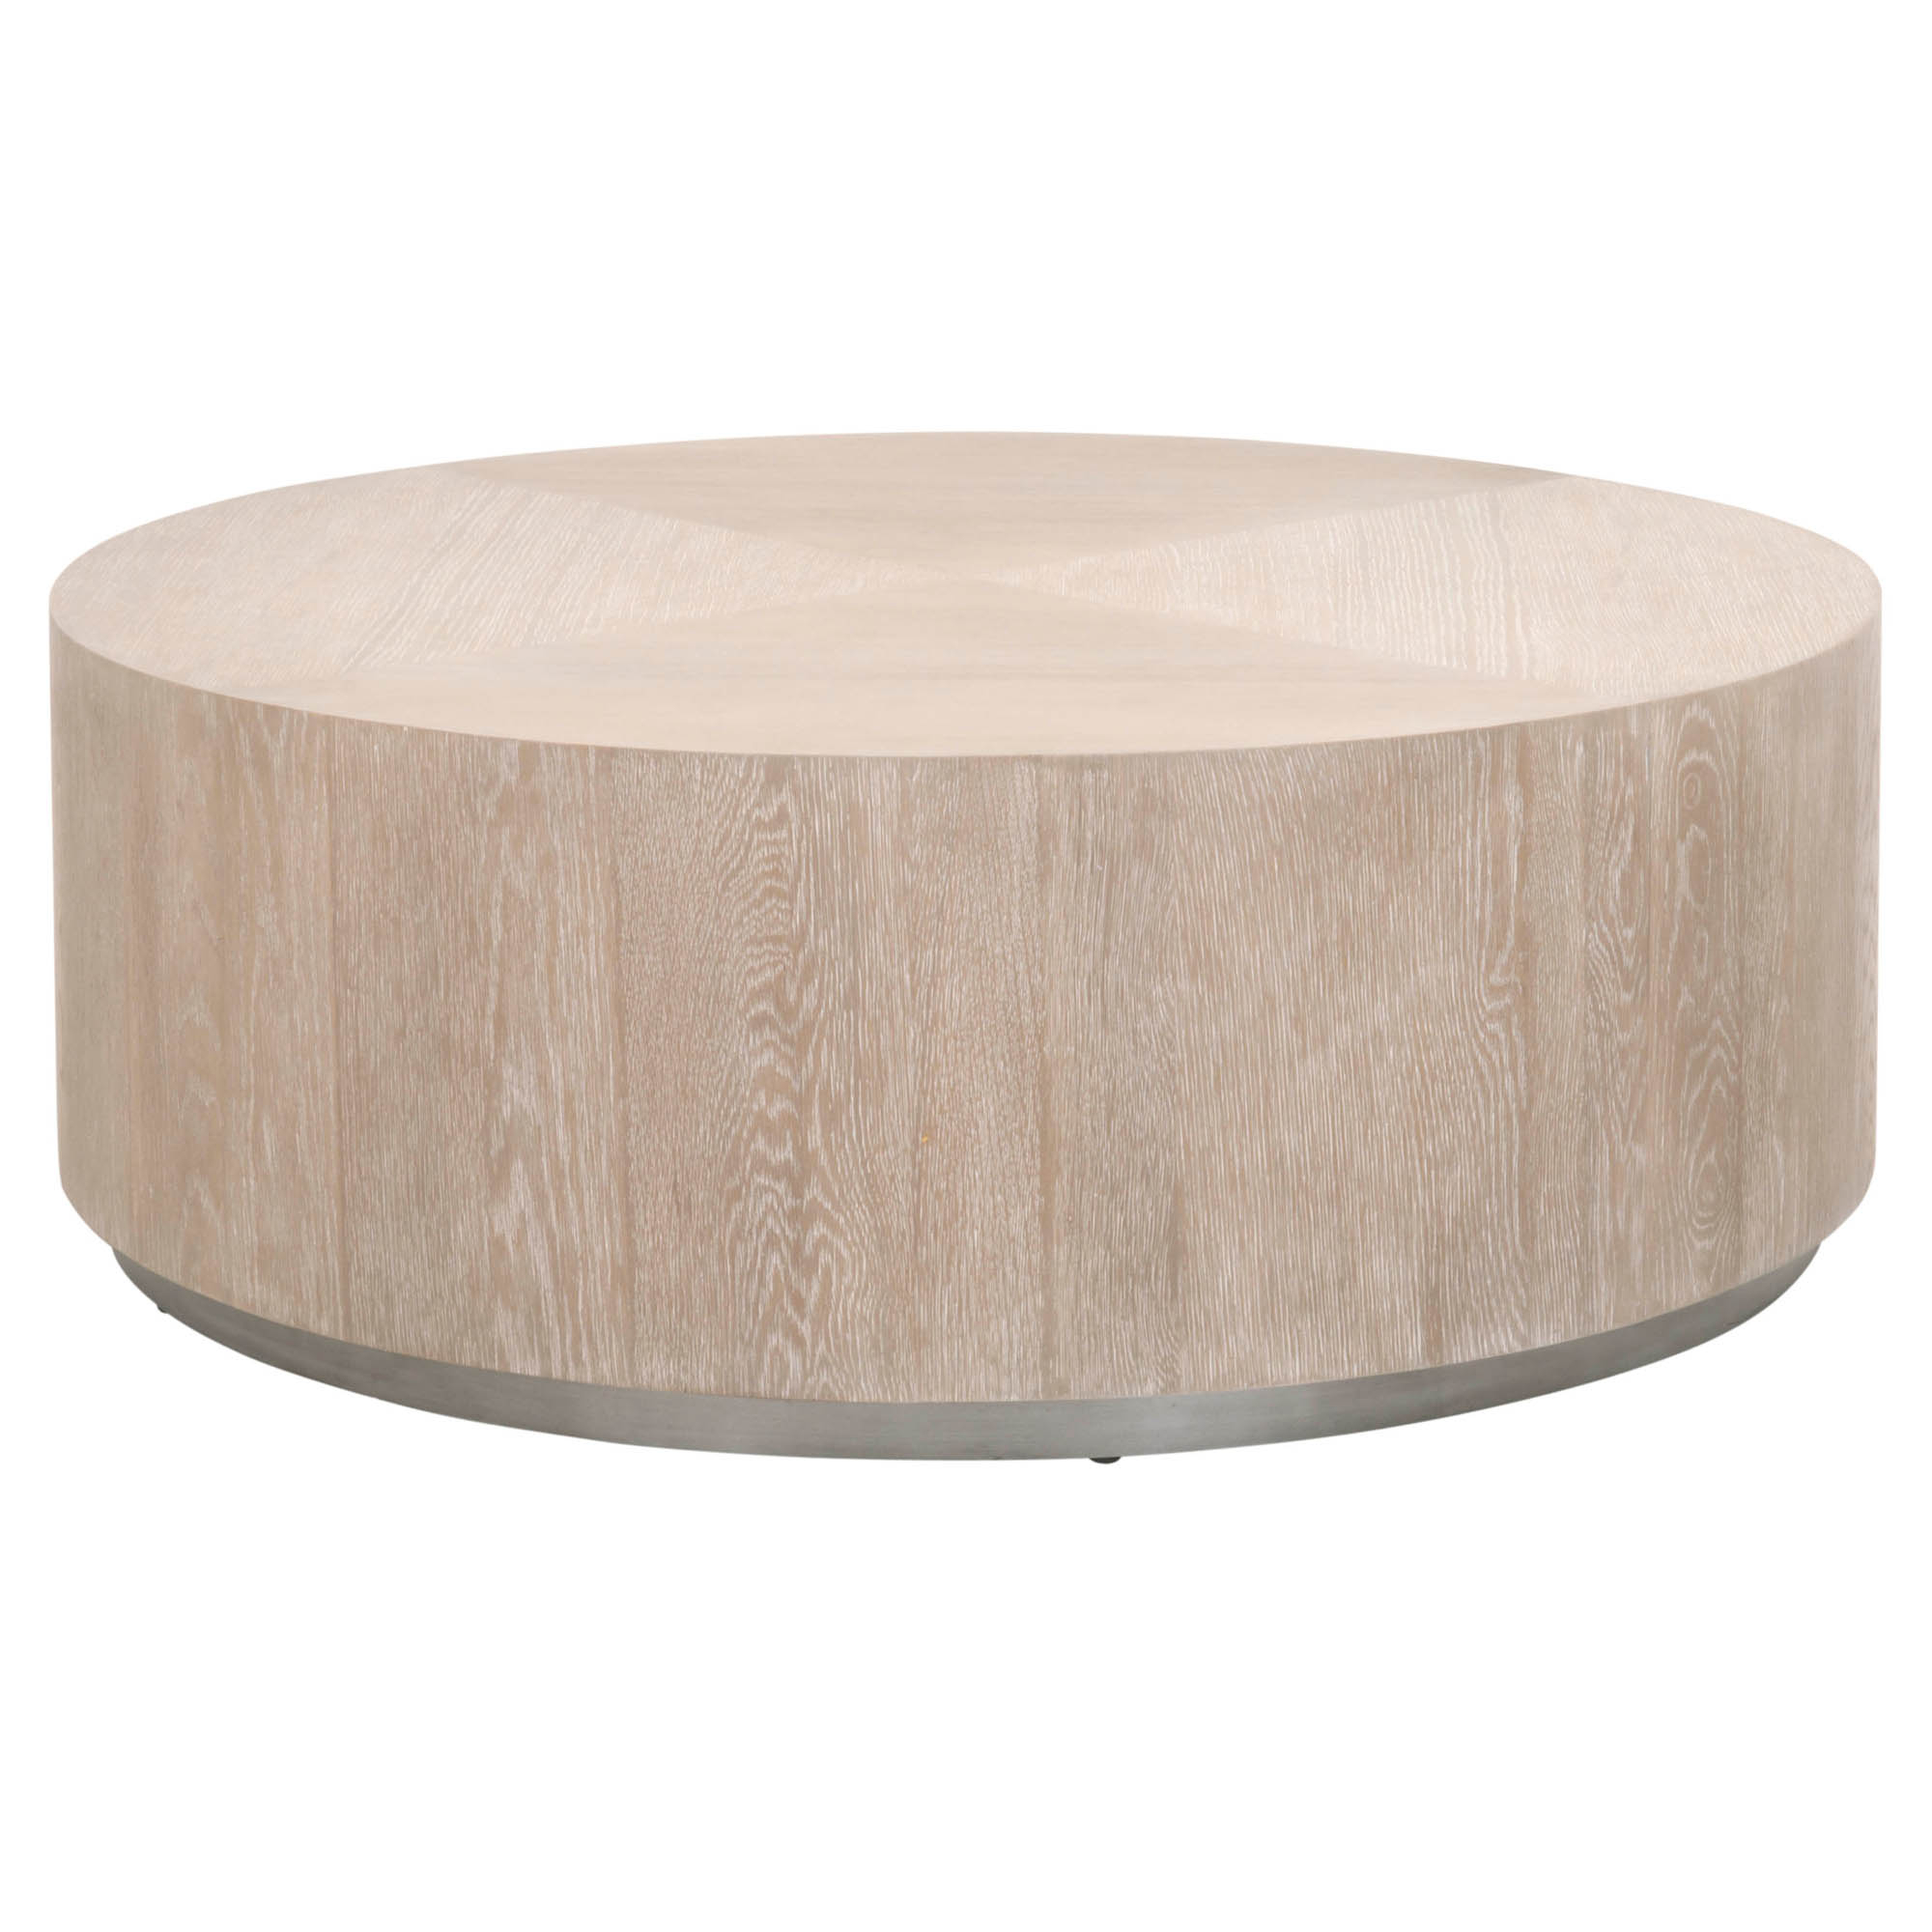 Roto Coffee Table, Large - Alder House